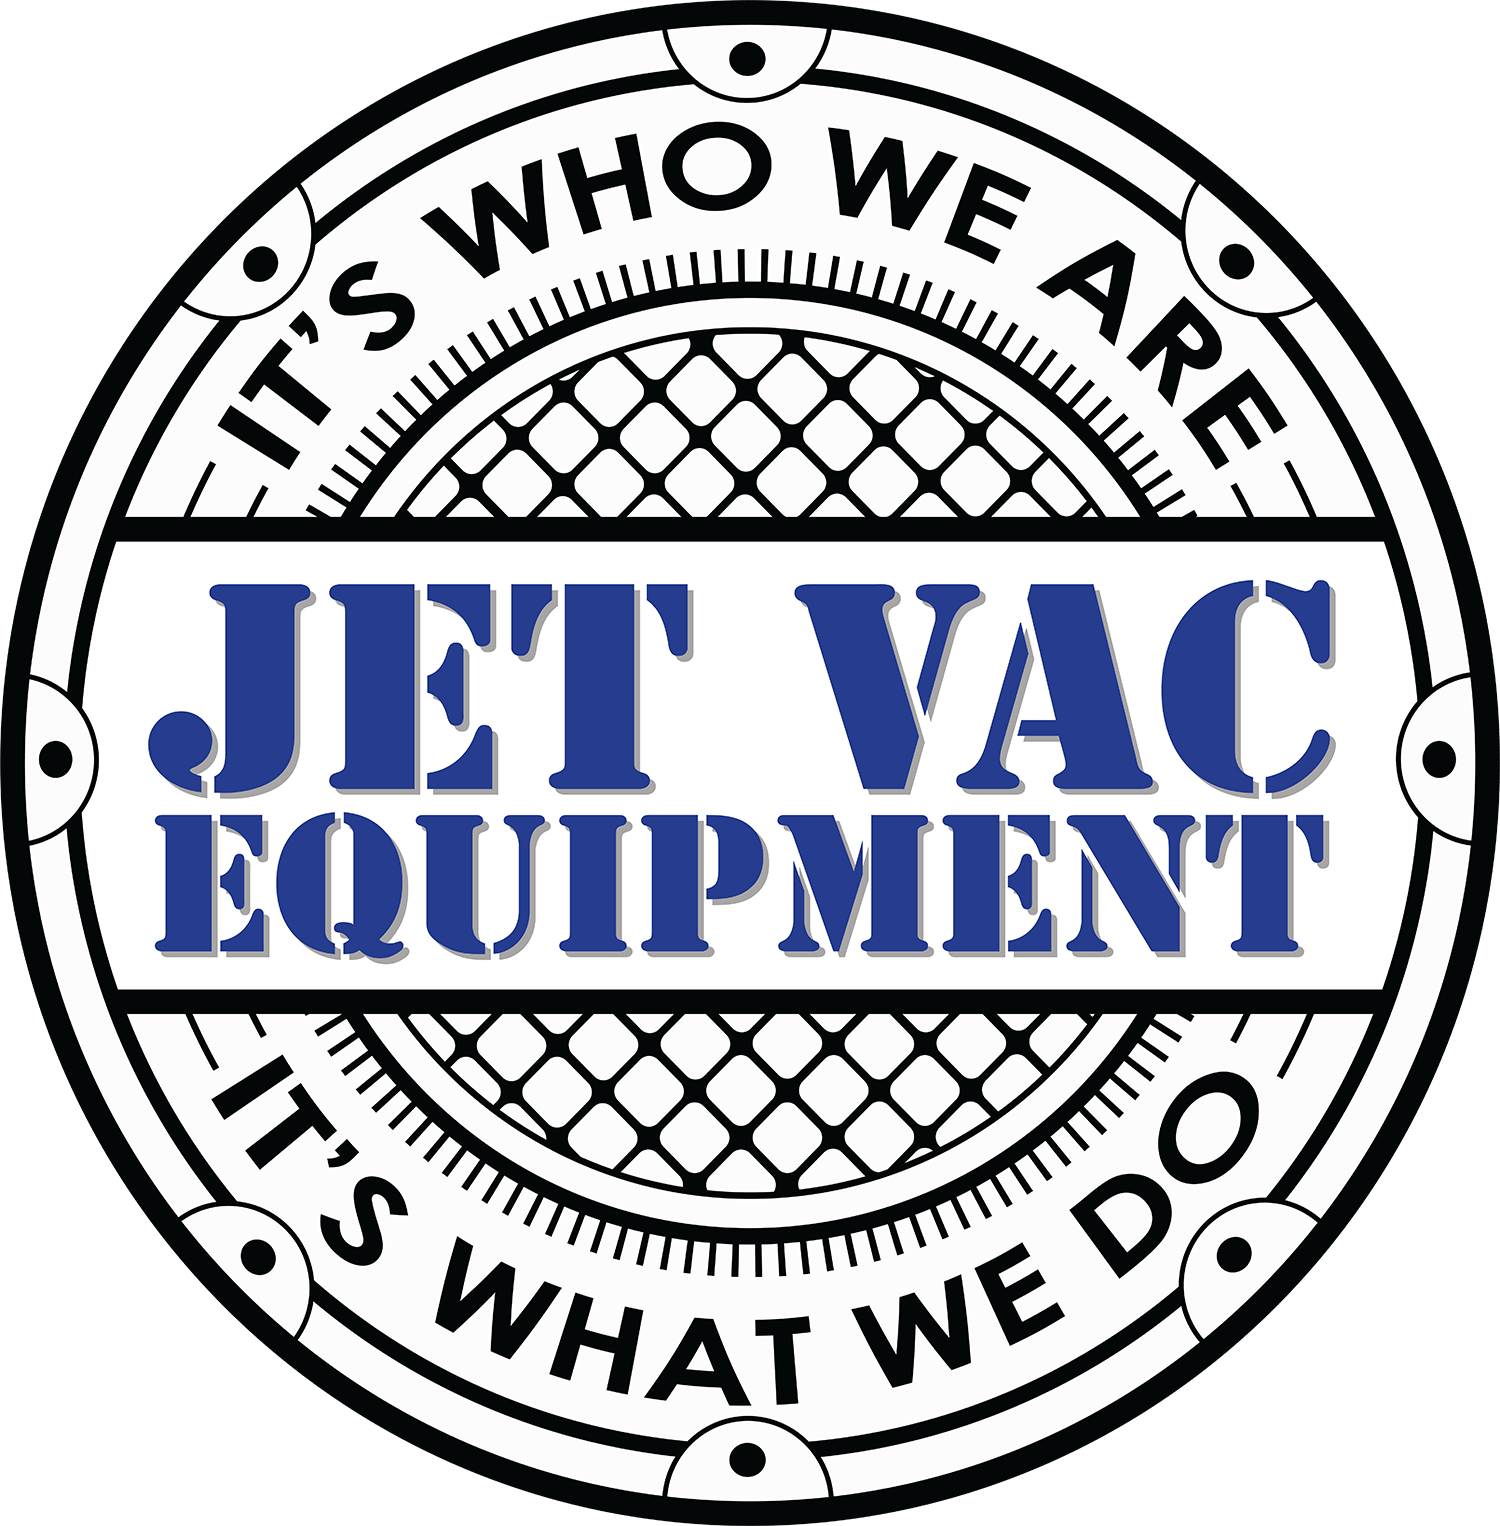 JetVac - It's Who We Are. It's What We Do